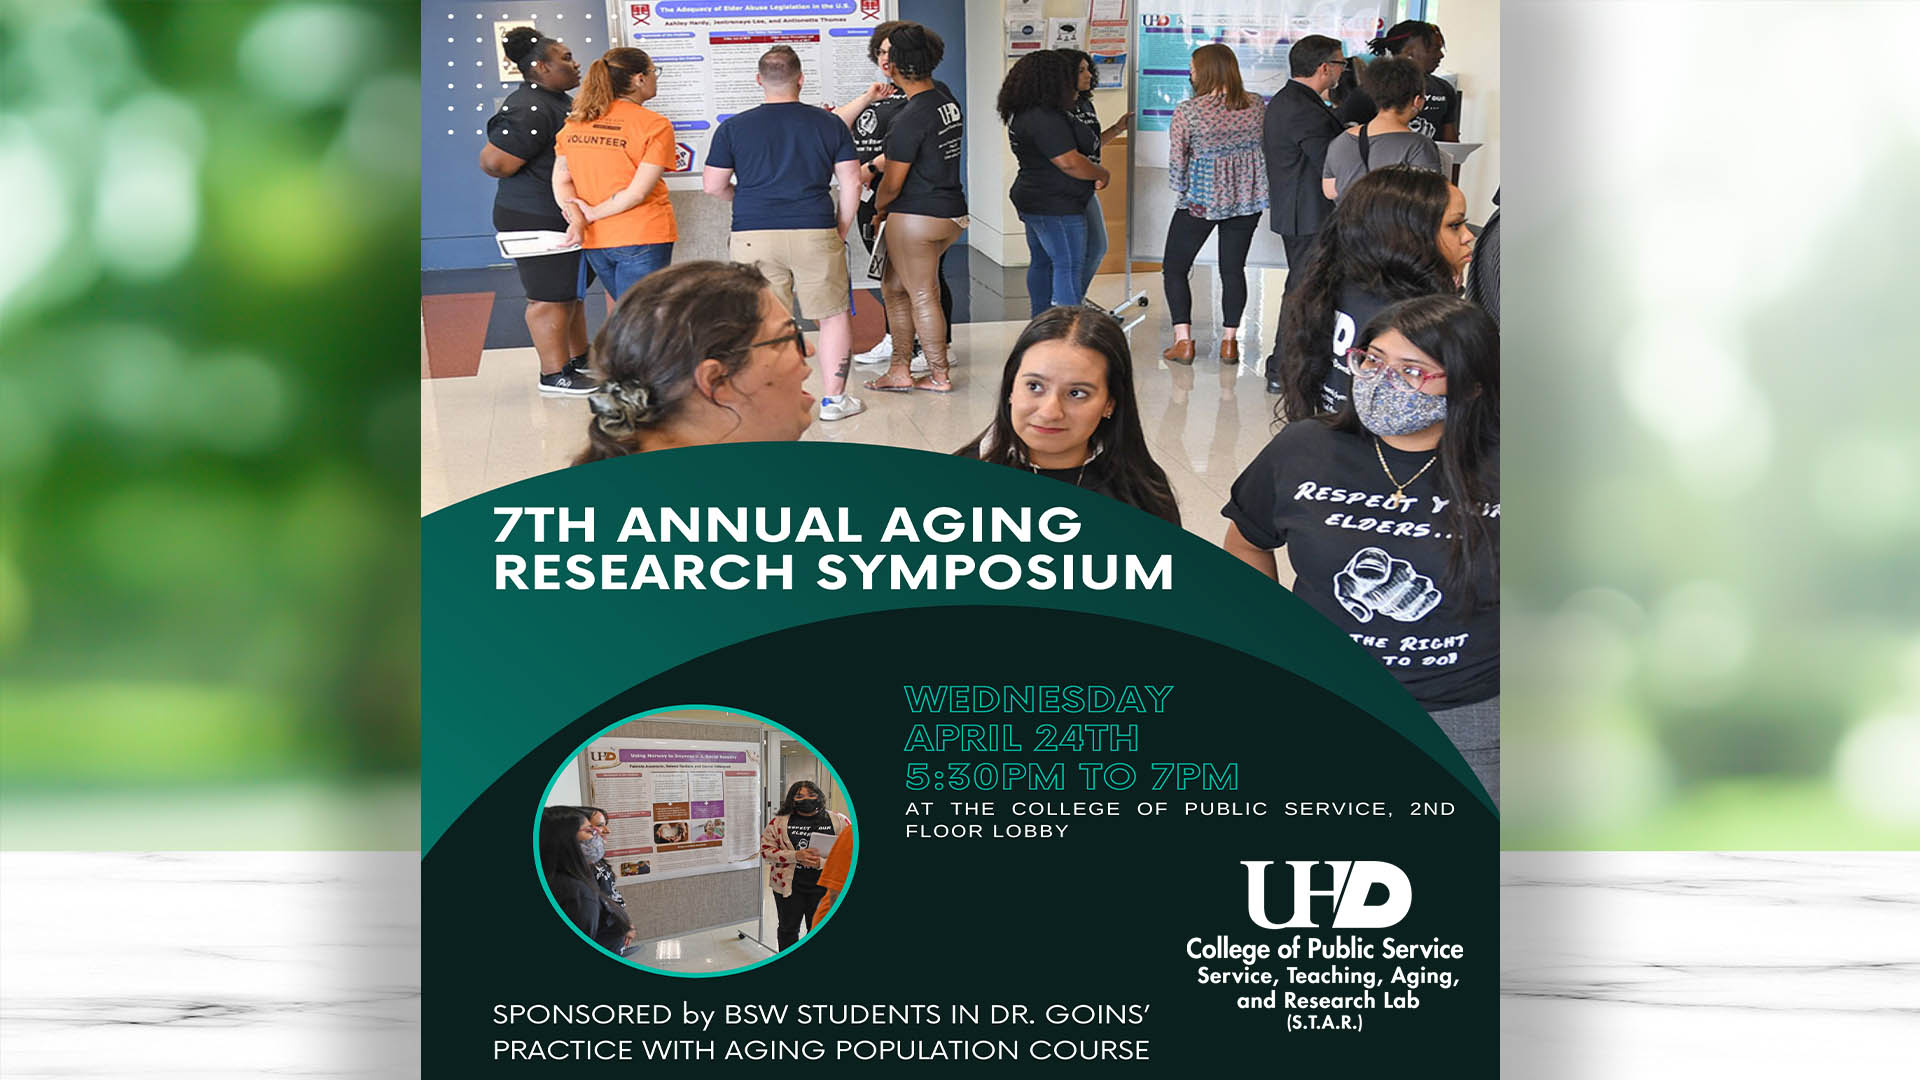 7th Annual Aging Research Symposium